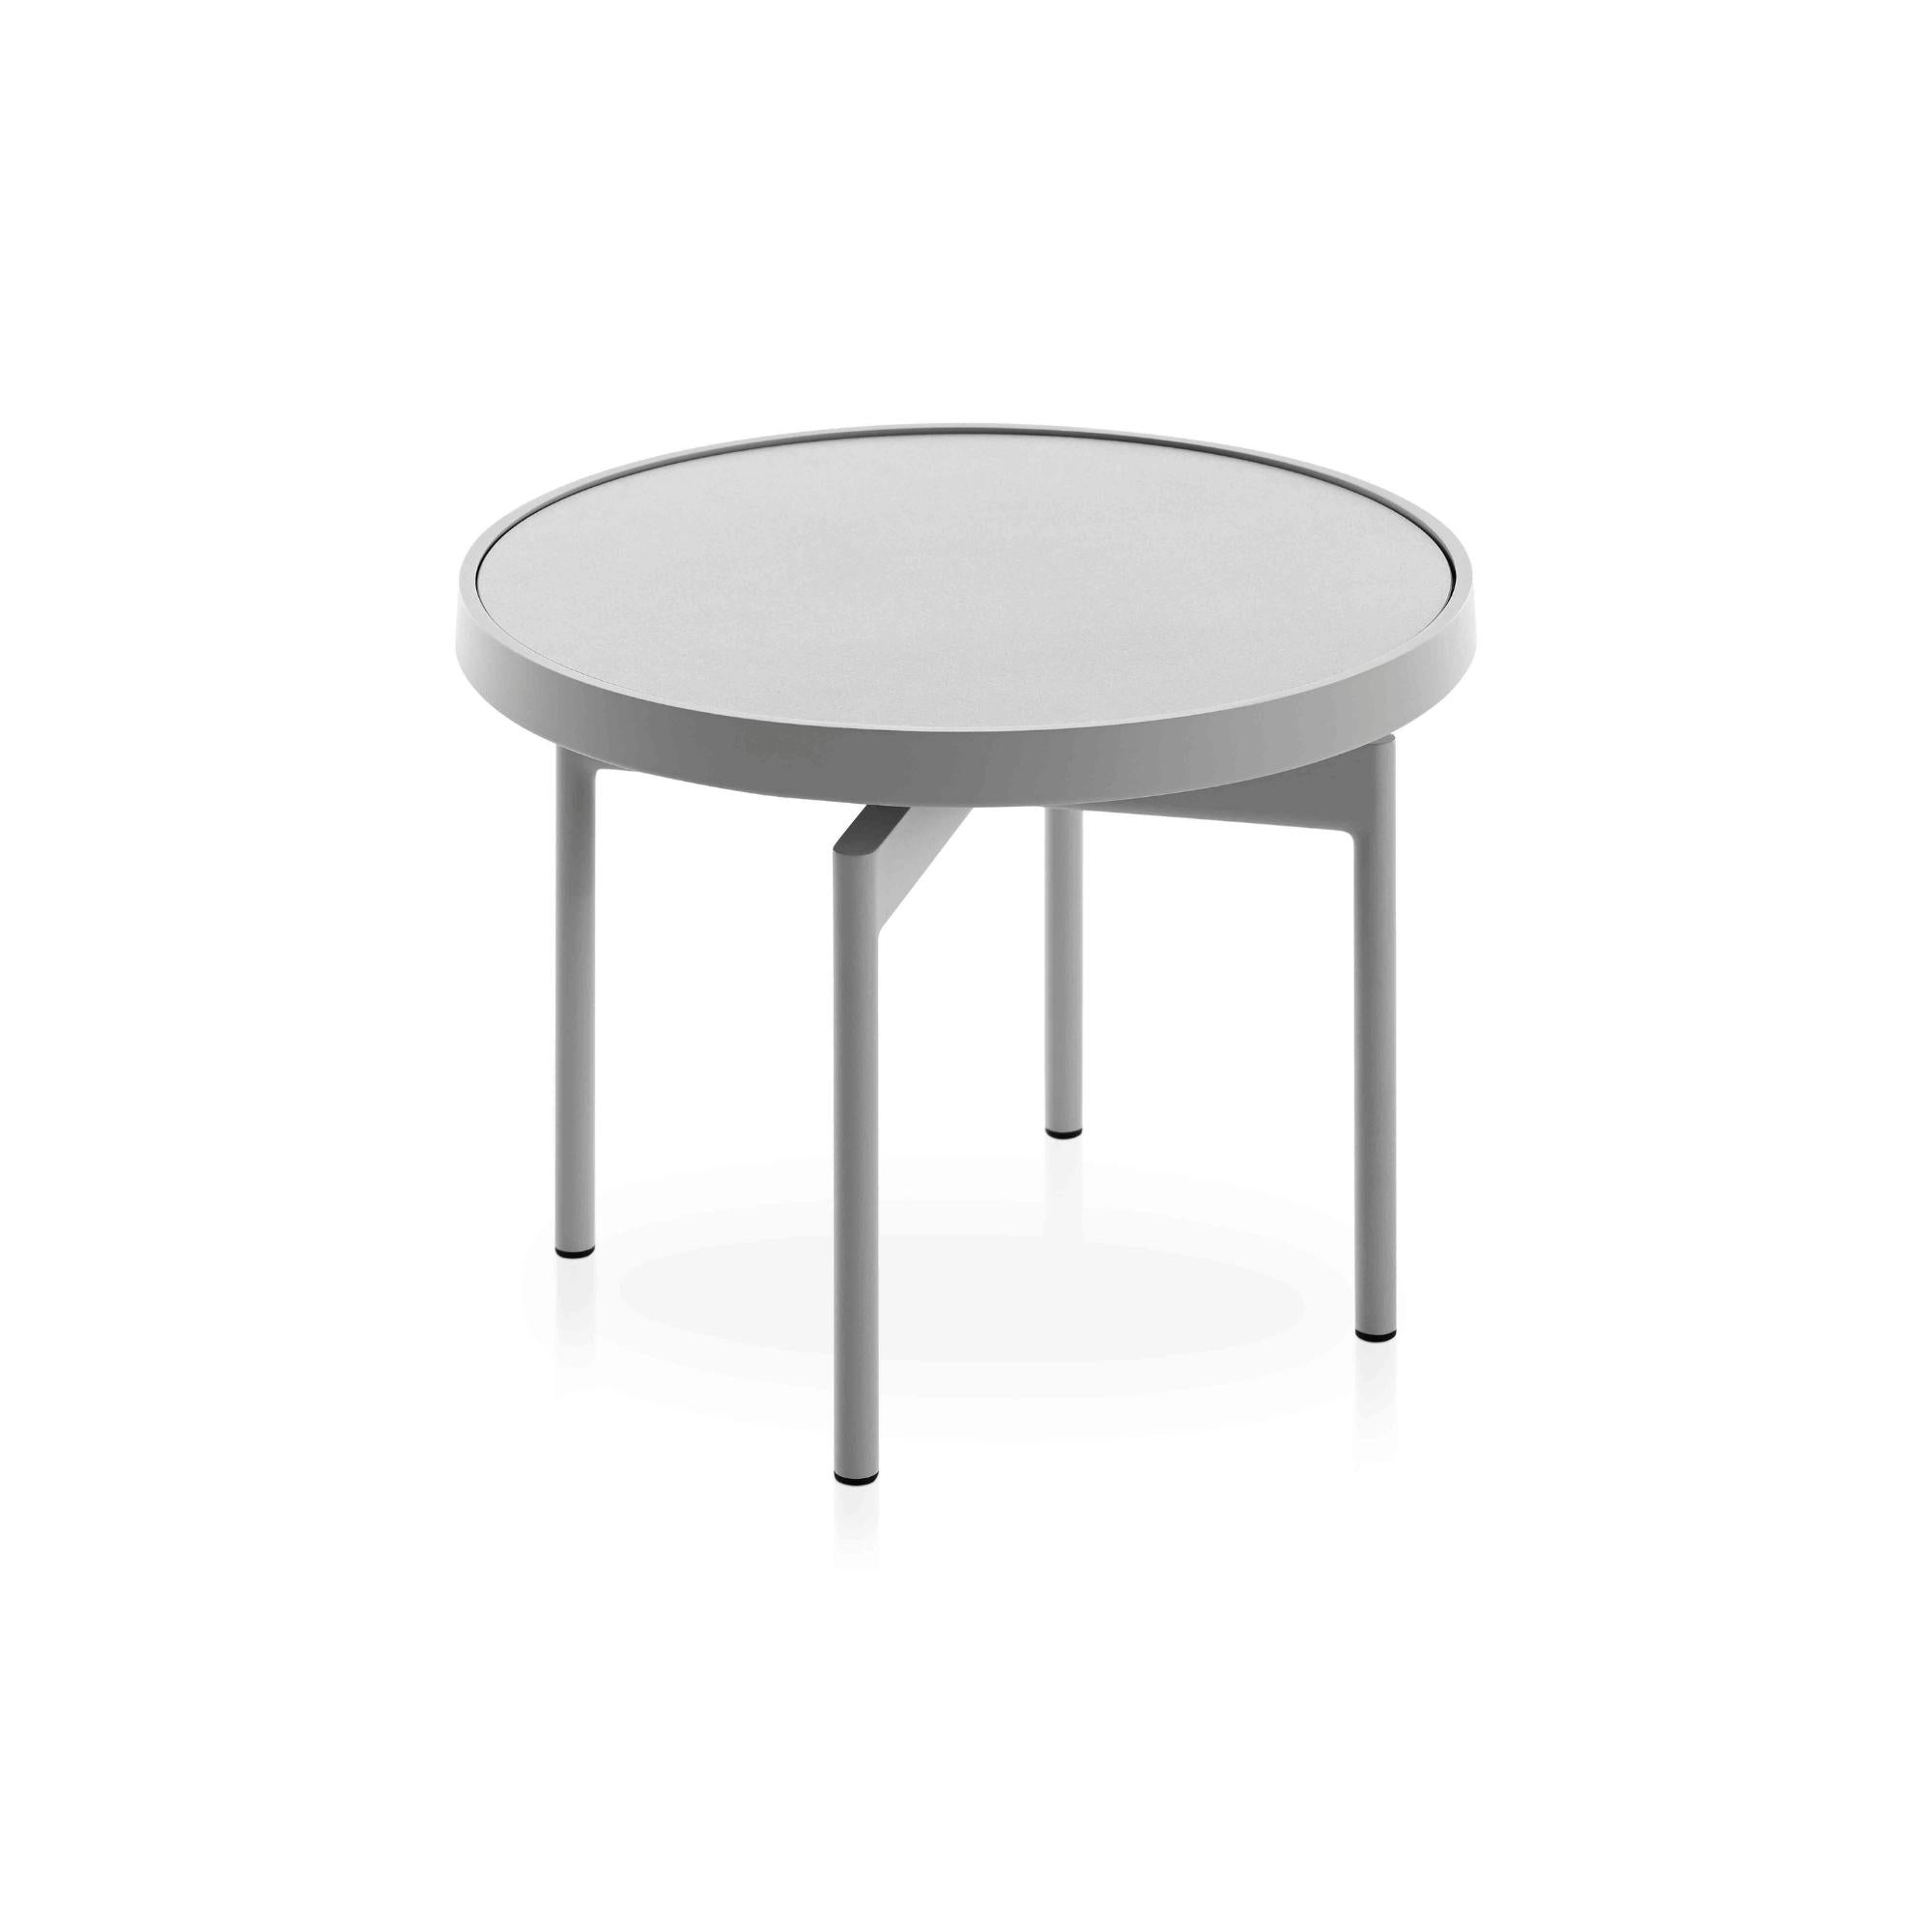 Onde Round Coffee Table Ø60 - THAT COOL LIVING